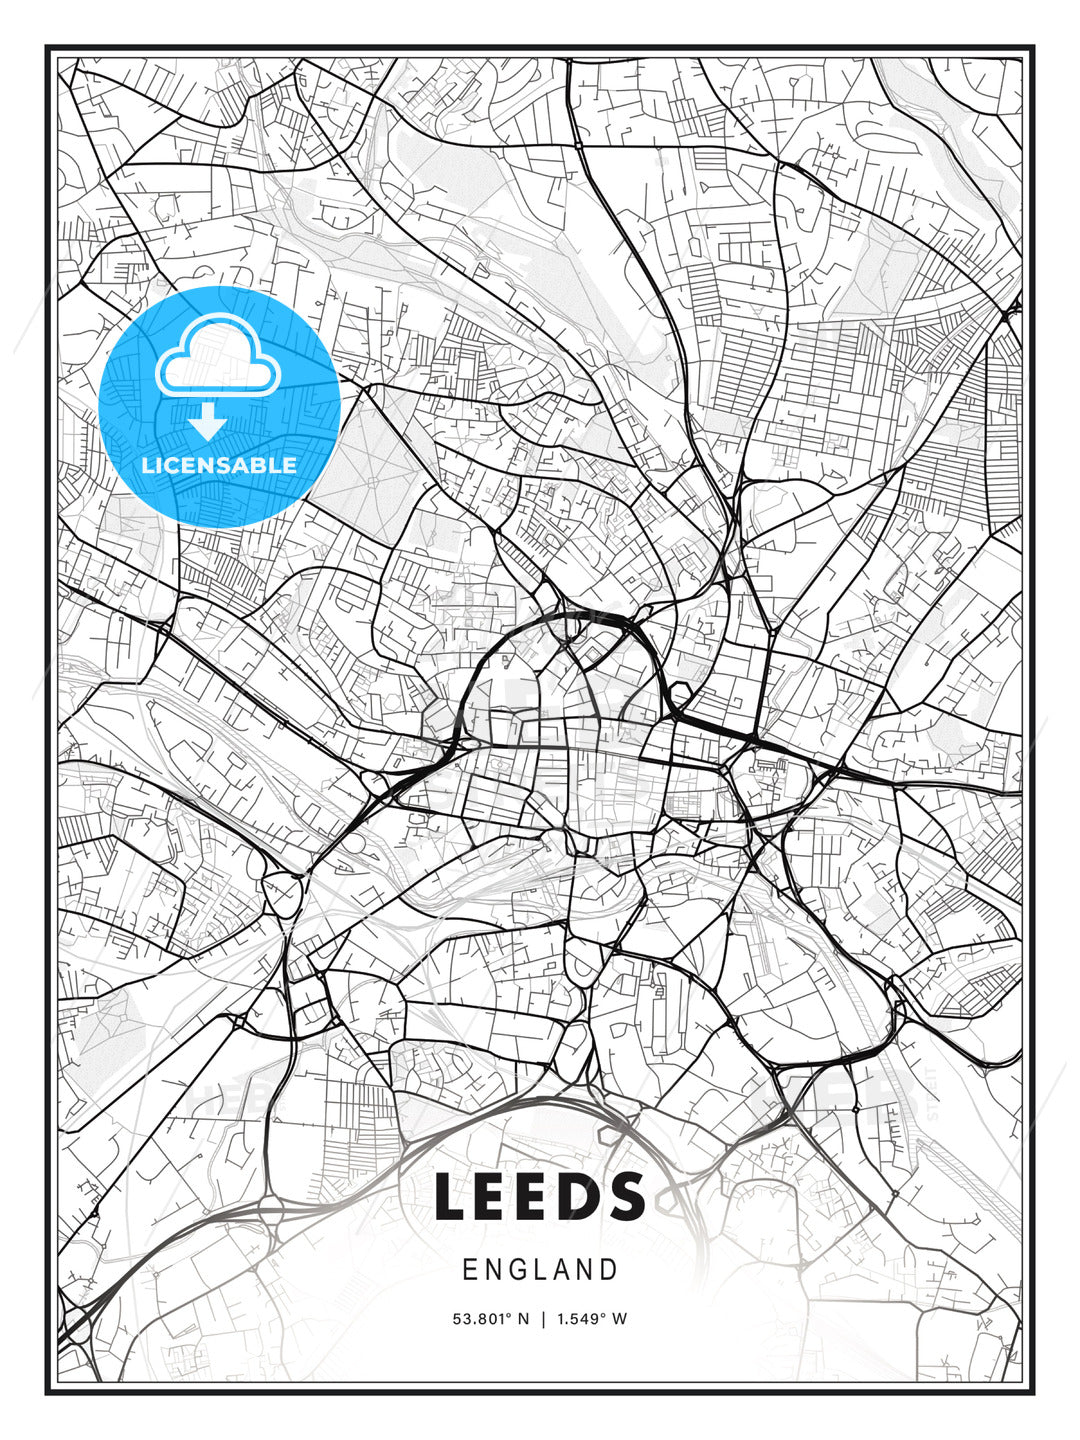 Leeds, England, Modern Print Template in Various Formats - HEBSTREITS Sketches